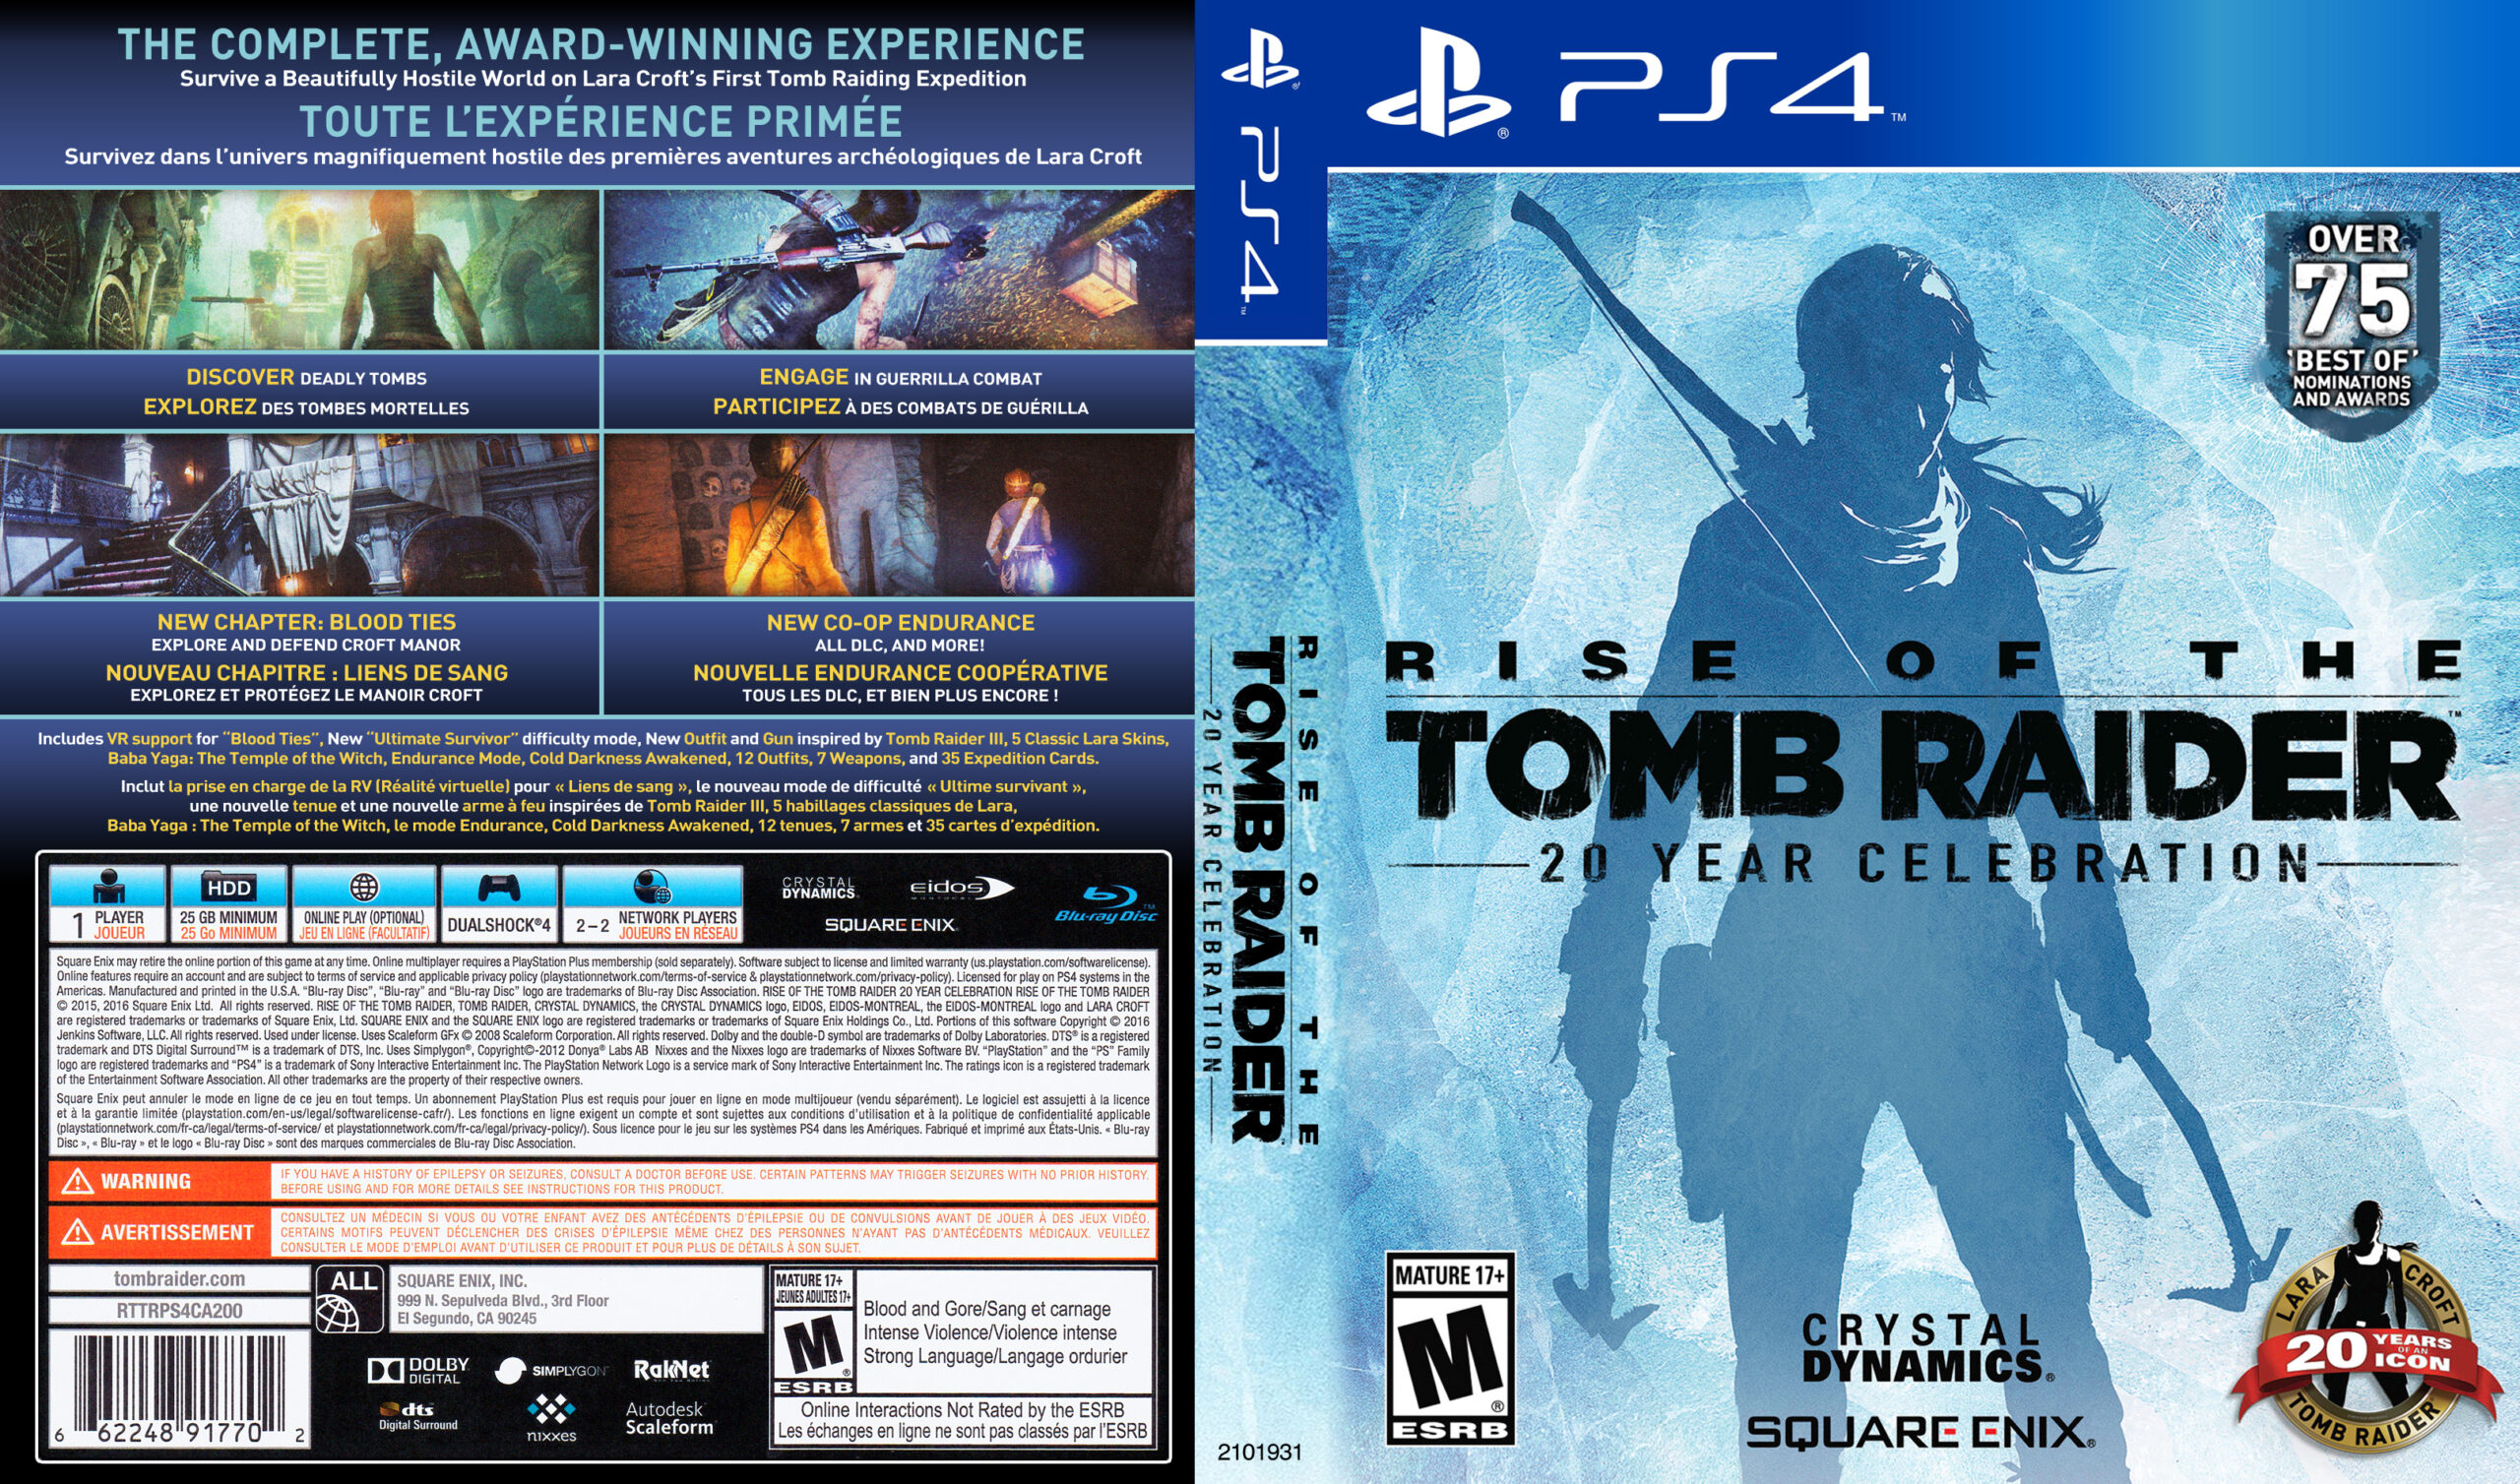 download-rise-of-the-tomb-raider-20-year-celebration-a0100-v0106-cusa05716-ps4-pkg-auctor